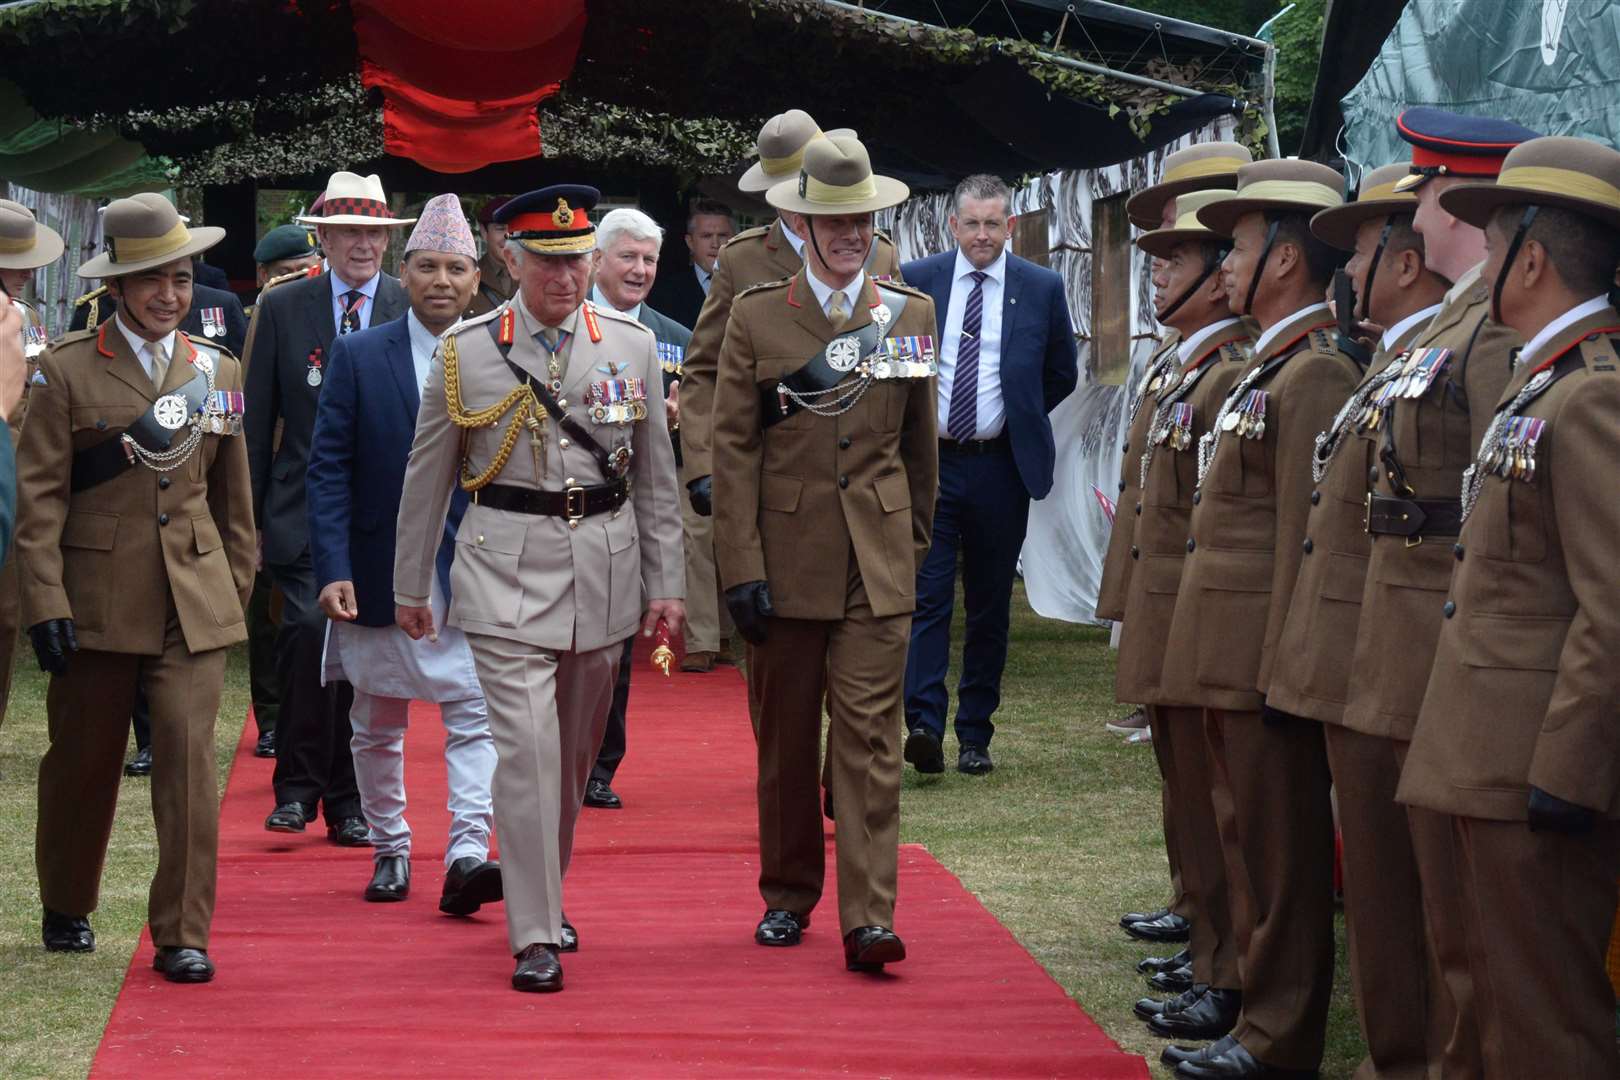 Prince Charles during his visit to the 1st Battalion The Royal Gurkha Rifles at the Sir John Moore Barracks, Shorncliffe on Tuesday. Picture: Chris Davey. (13594040)